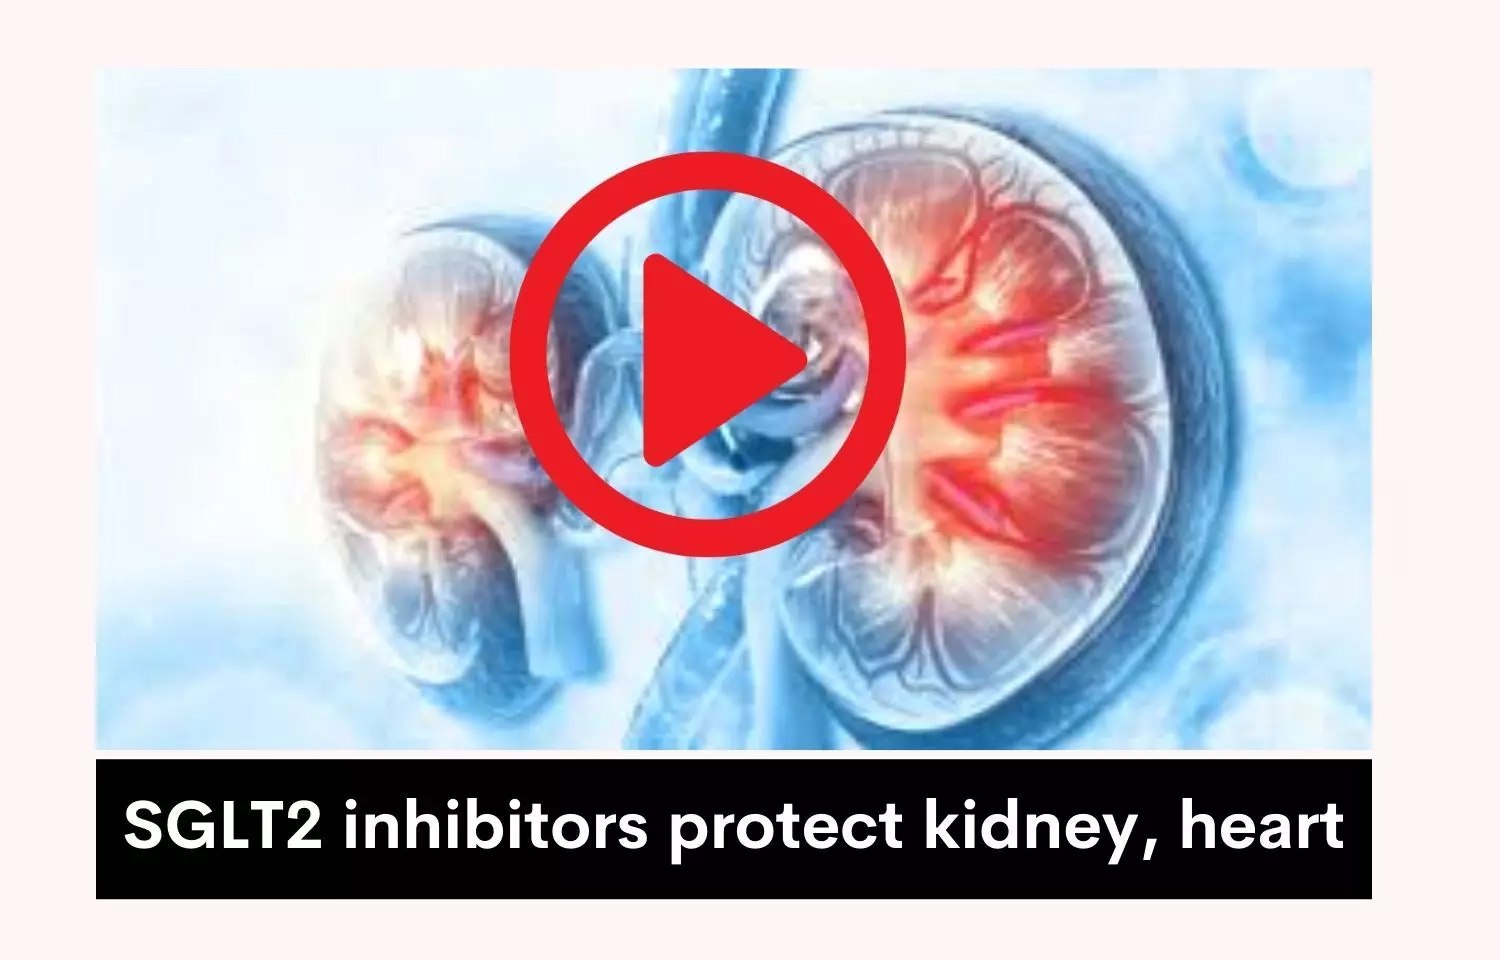 SGLT 2 inhibitors provide kidney, cardiovascular benefits for diabetes patients